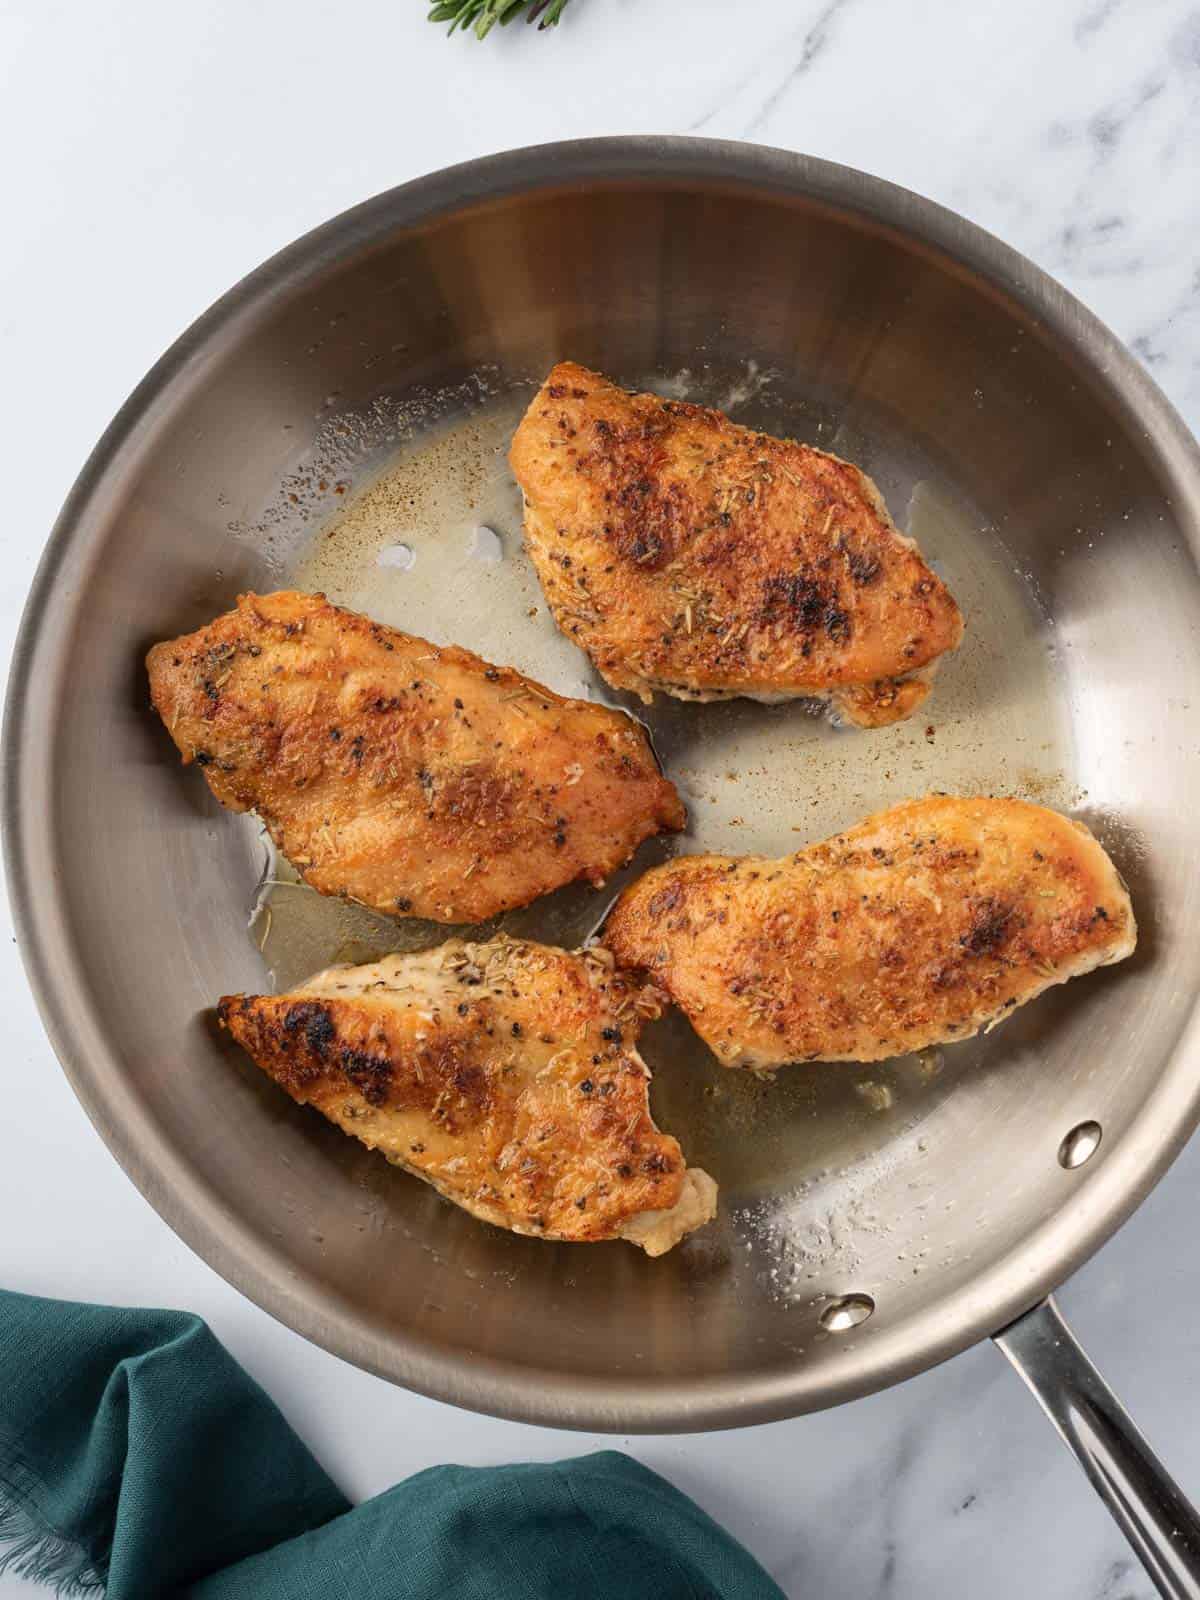 Chicken breasts seared in a pan.